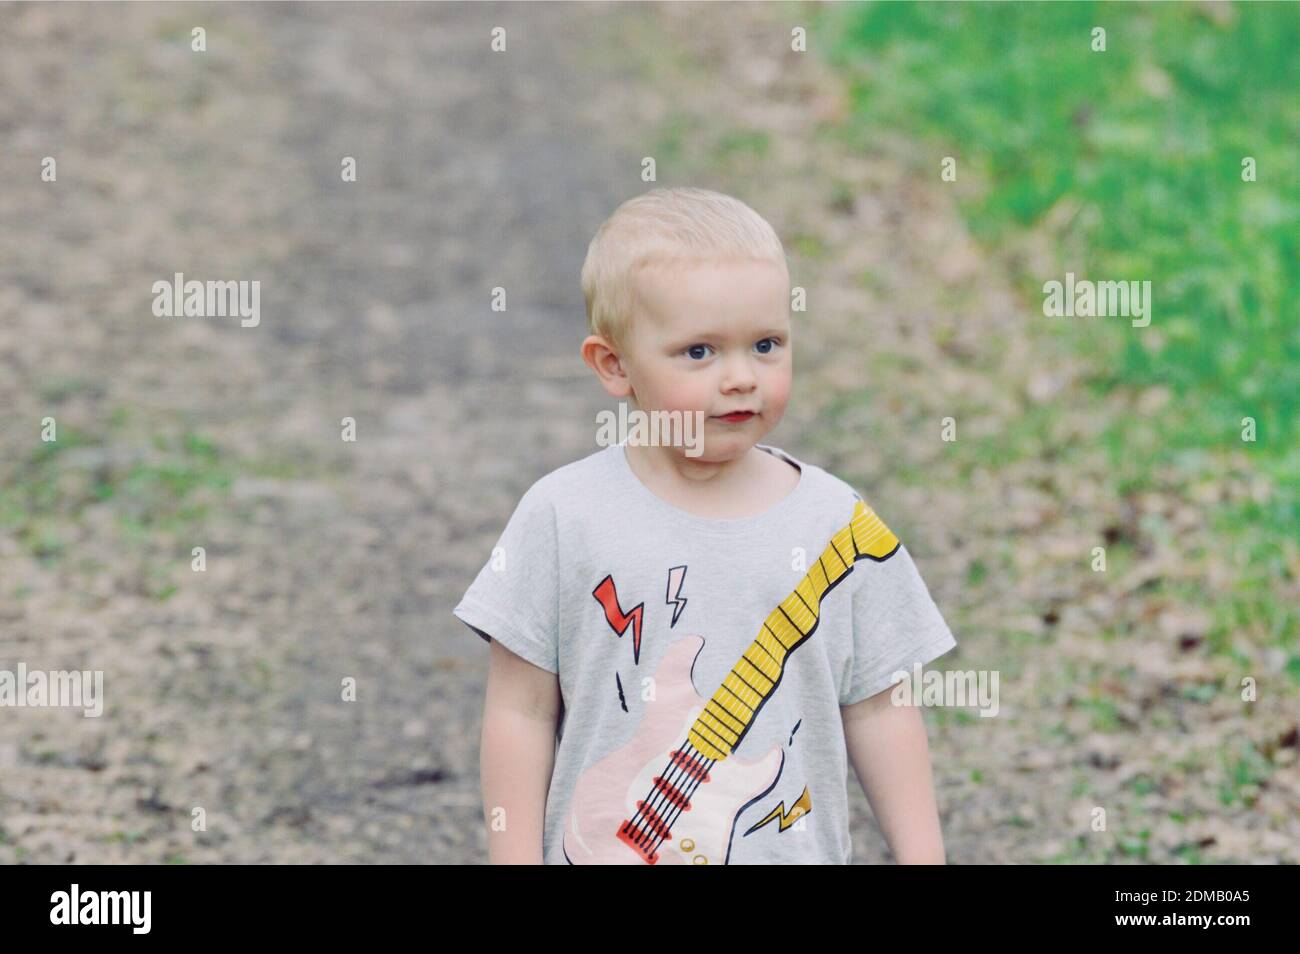 Cute Boy Looking Away Standing On Dirt Road Stock Photo